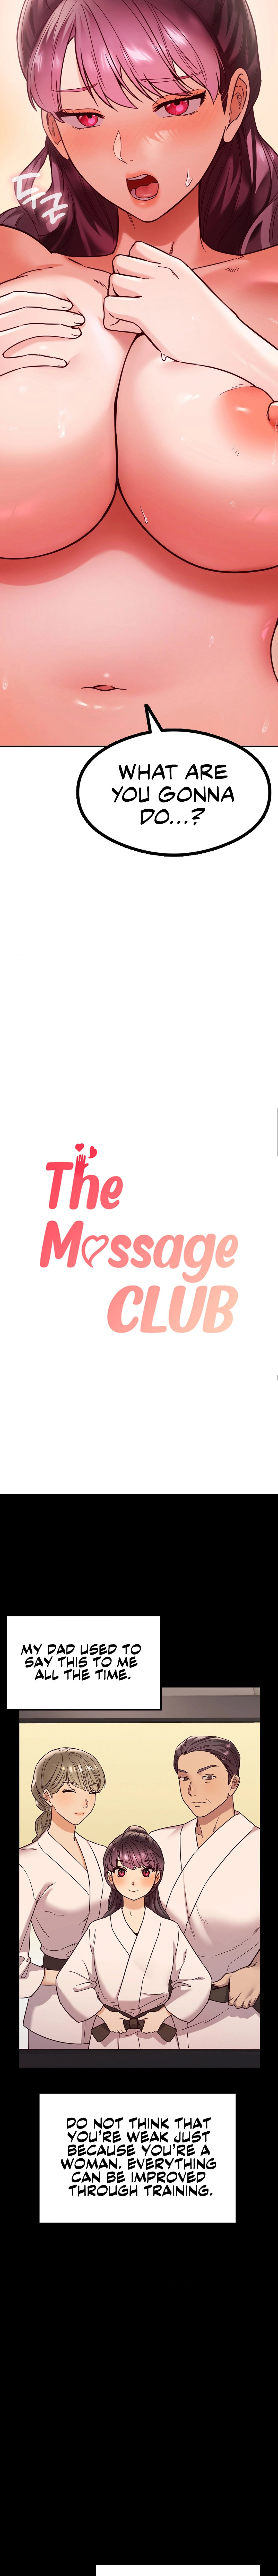 The Massage Club - Chapter 6 Page 2